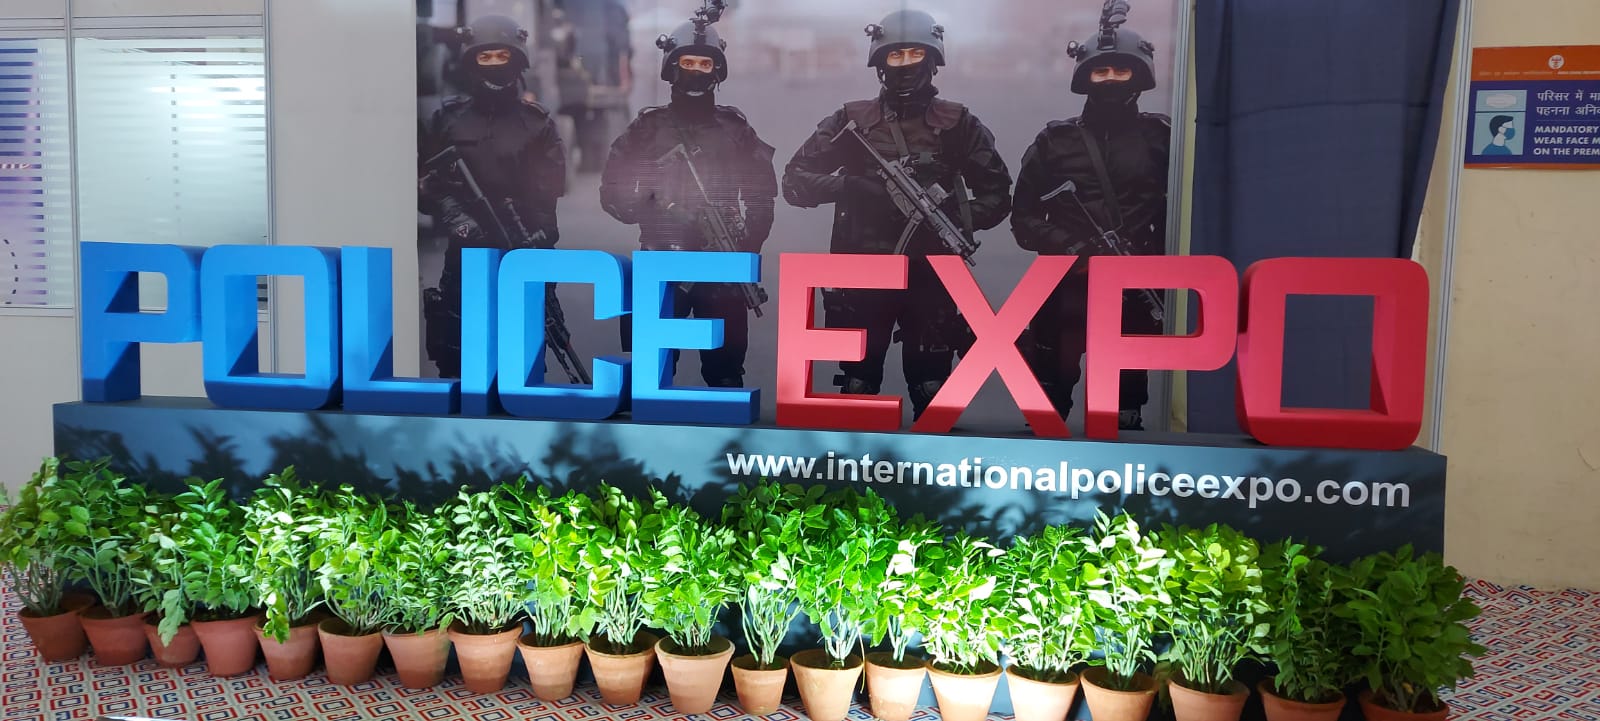 Cyber Security, Investigation And Forensic Tools Showstopper At International Police Expo